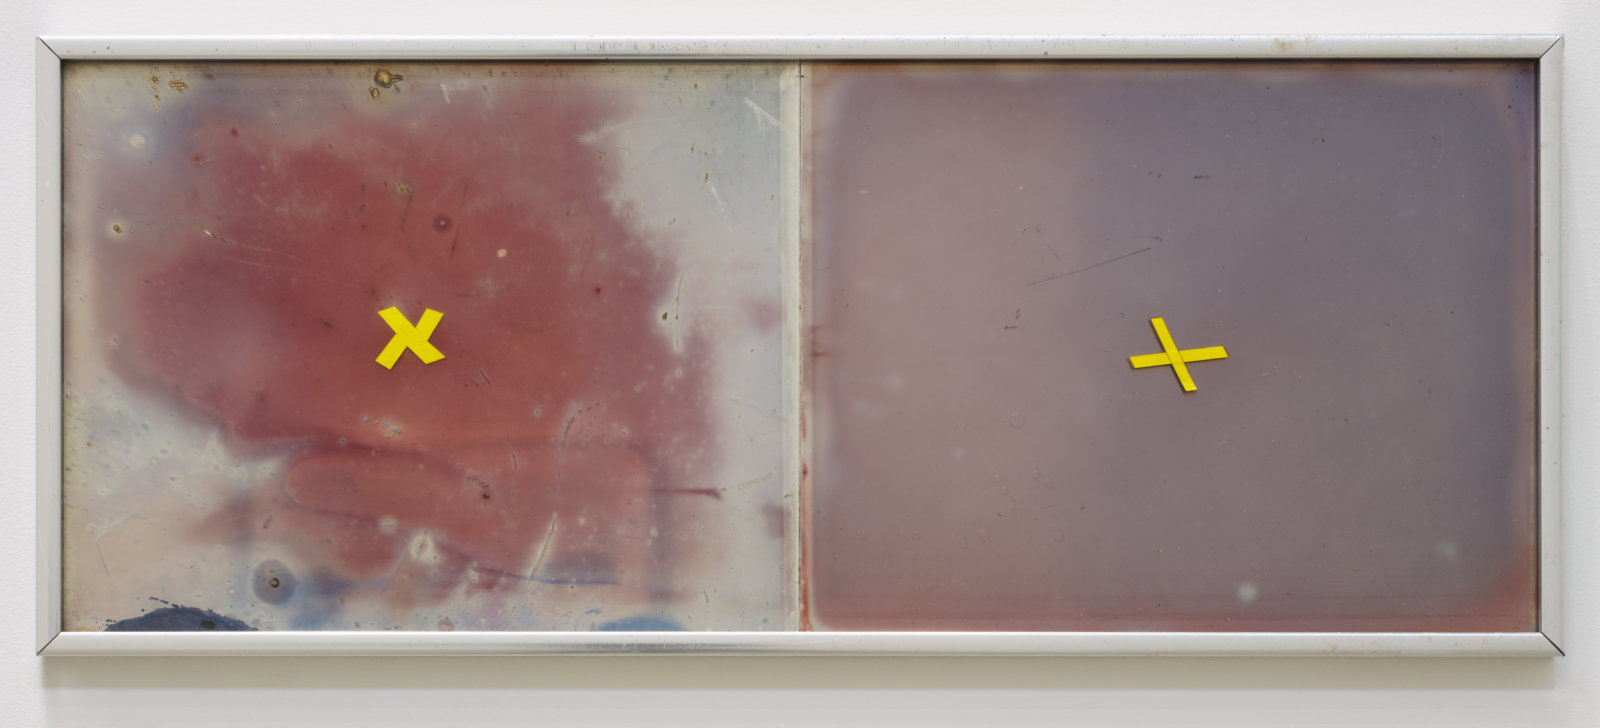 Jerry Pethick, Conjugate, 1969–1970, transmission holograms, 7 x 20 in. (18 x 51 cm)
